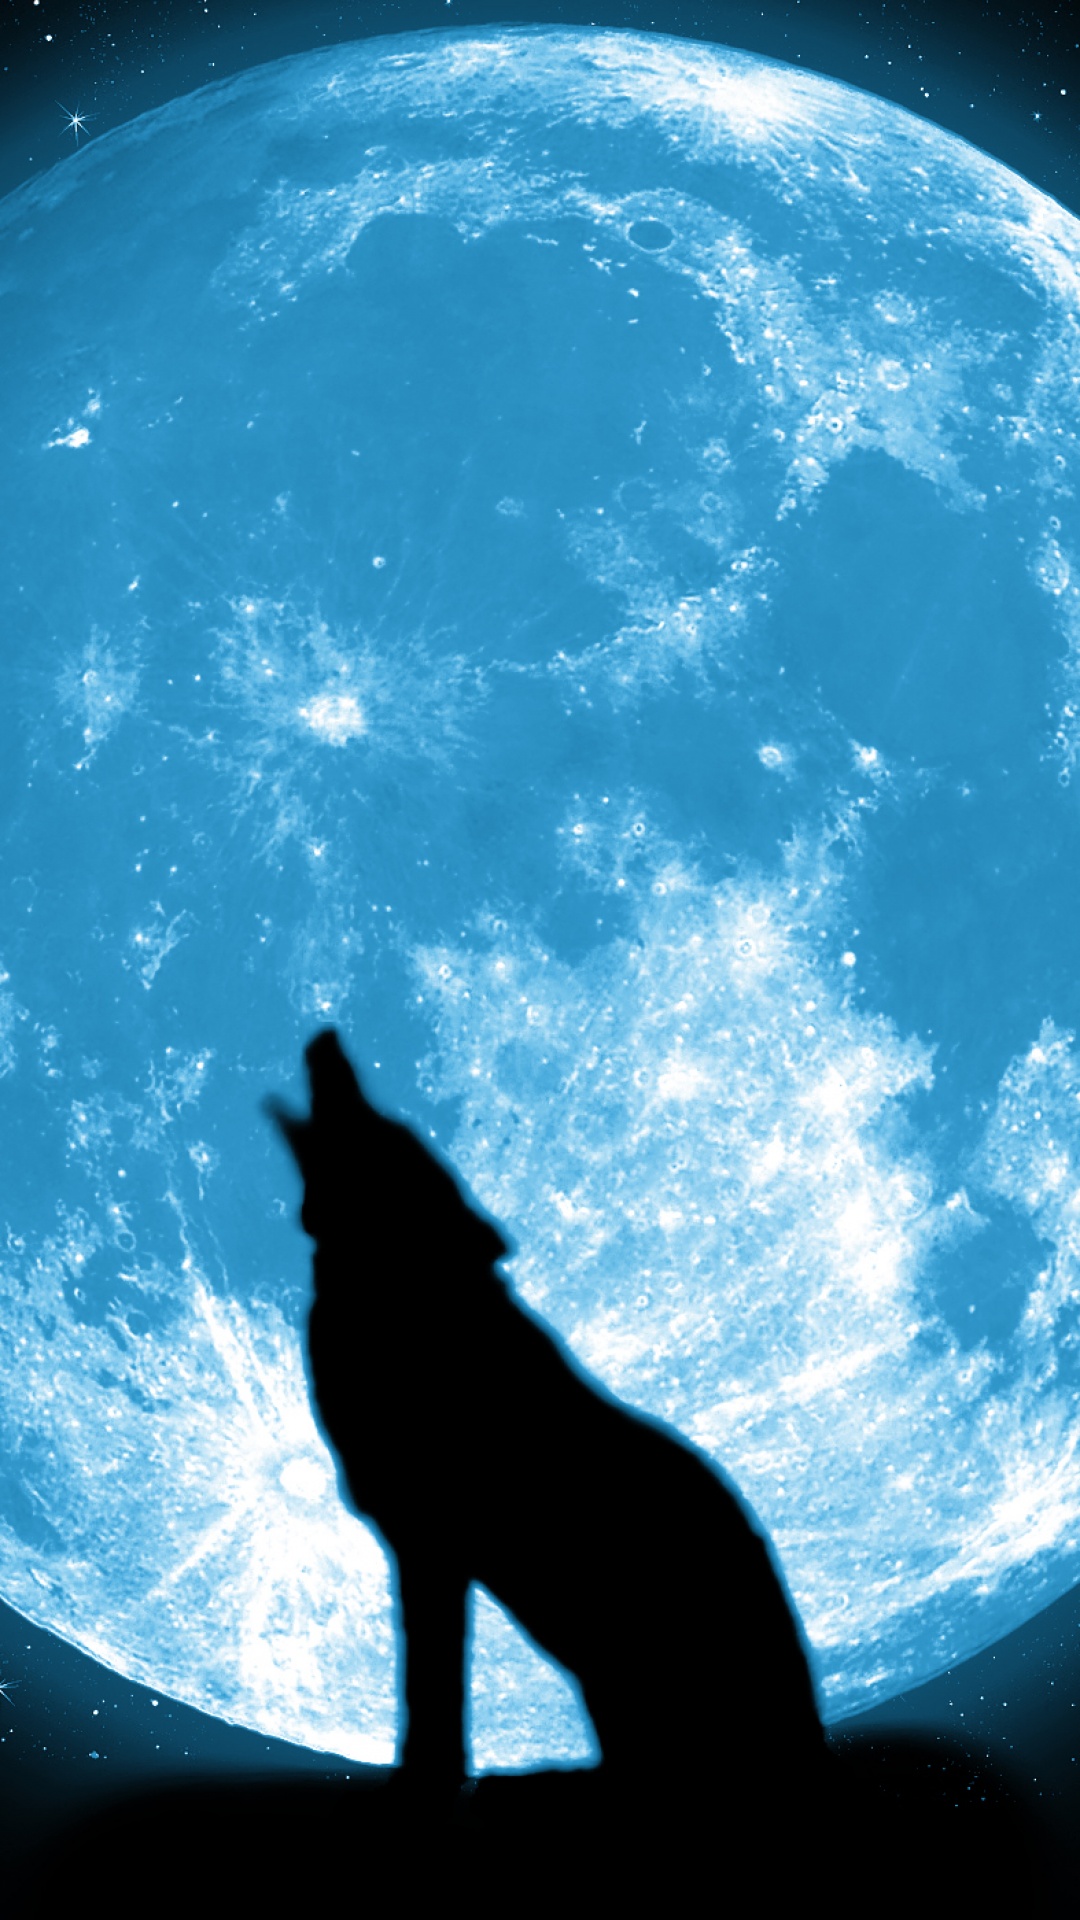 Wolf And Ful Moom Iphone Wallpaper Iphone Wallpapers